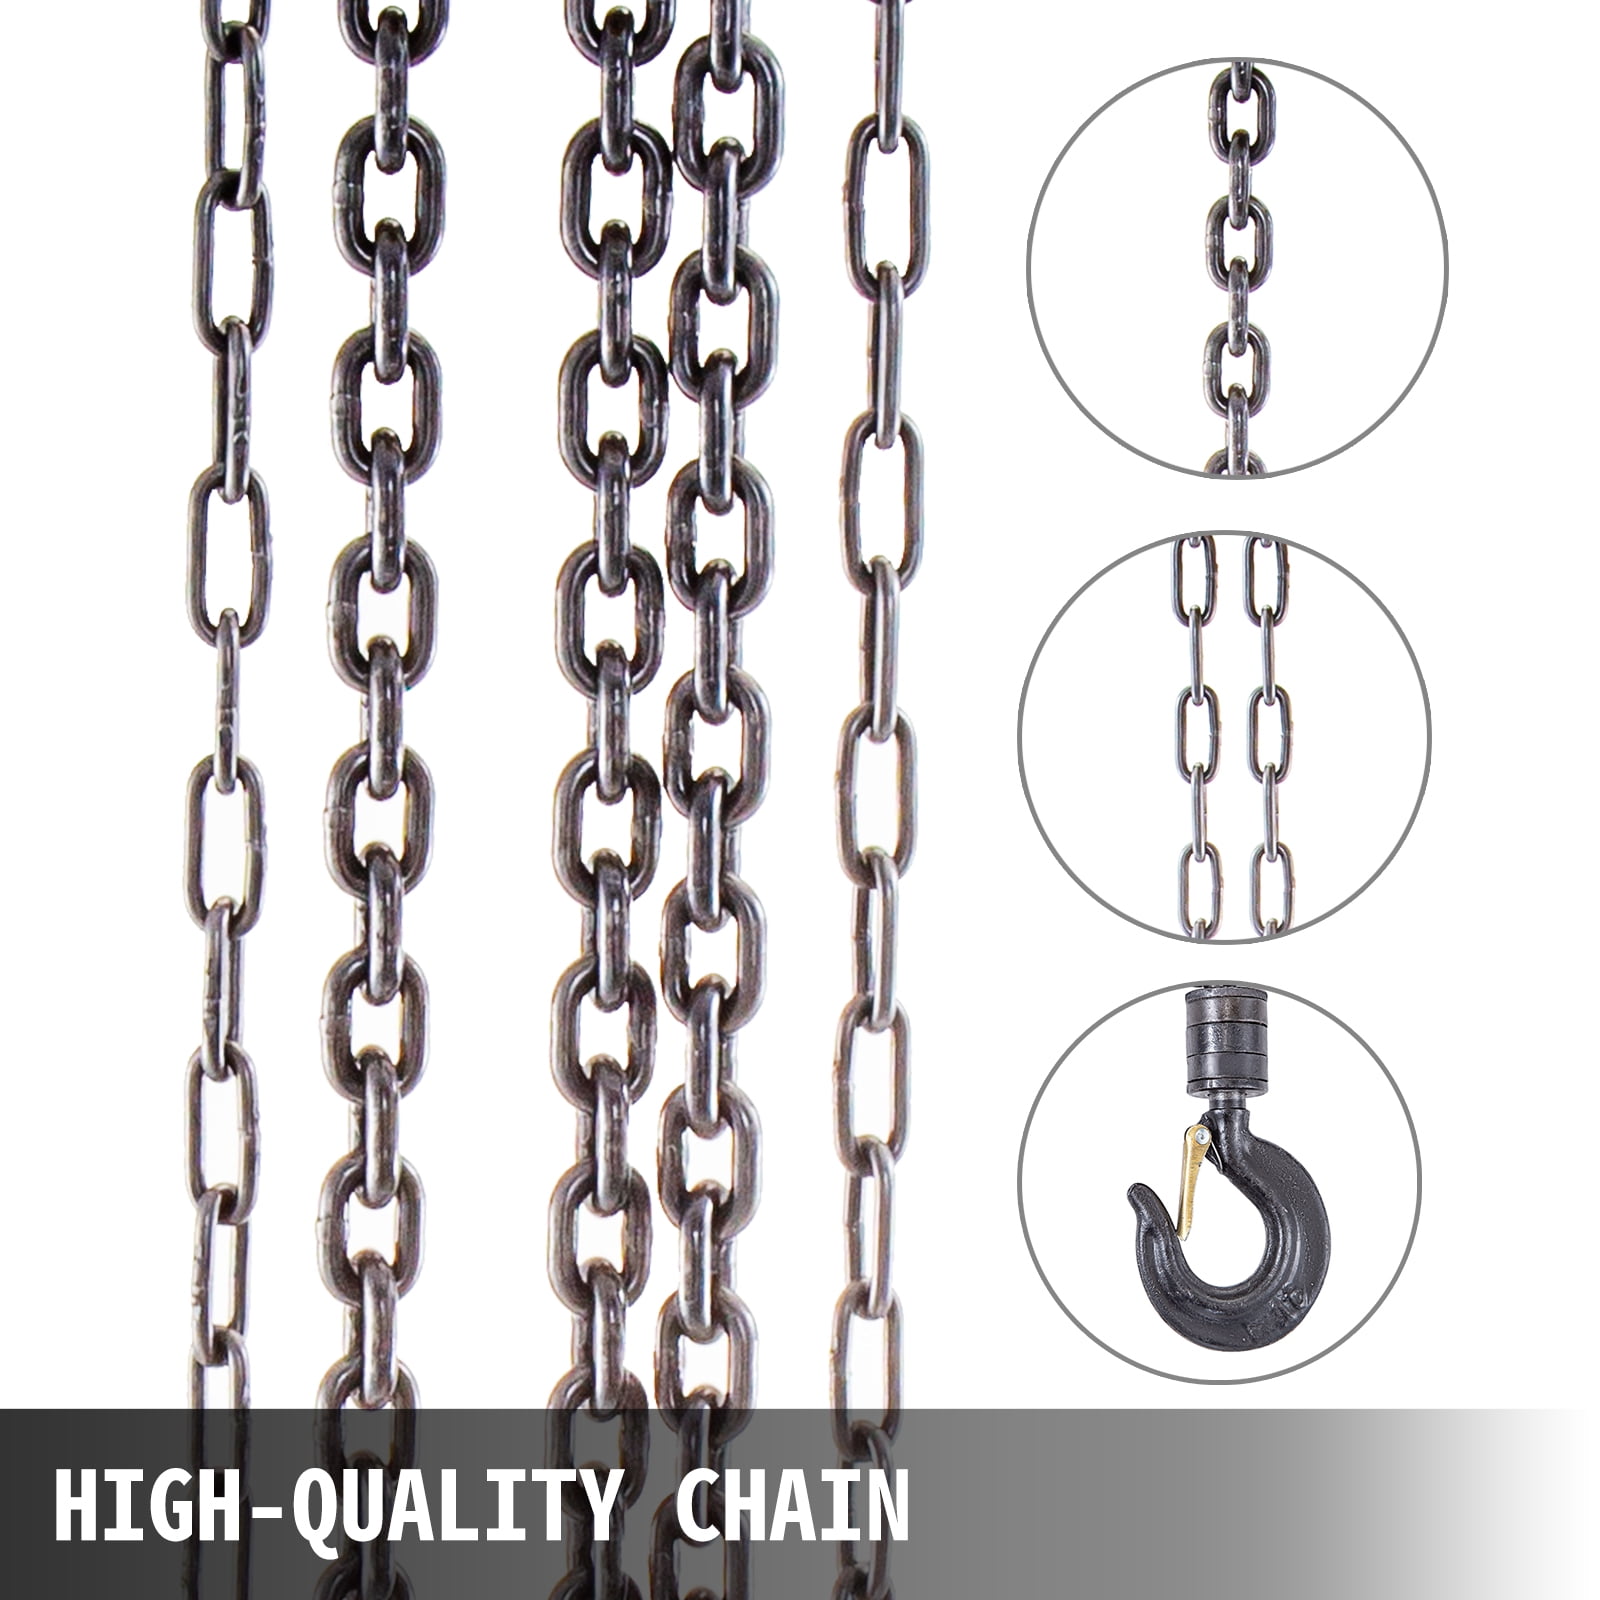 Red 7ft/2m Lift Manual Hand Chain Block VEVOR Hand Chain Hoist Manual Hoist w/Industrial-Grade Steel Construction for Lifting Good in Transport & Workshop 2200 lbs /1 Ton Capacity Chain Block